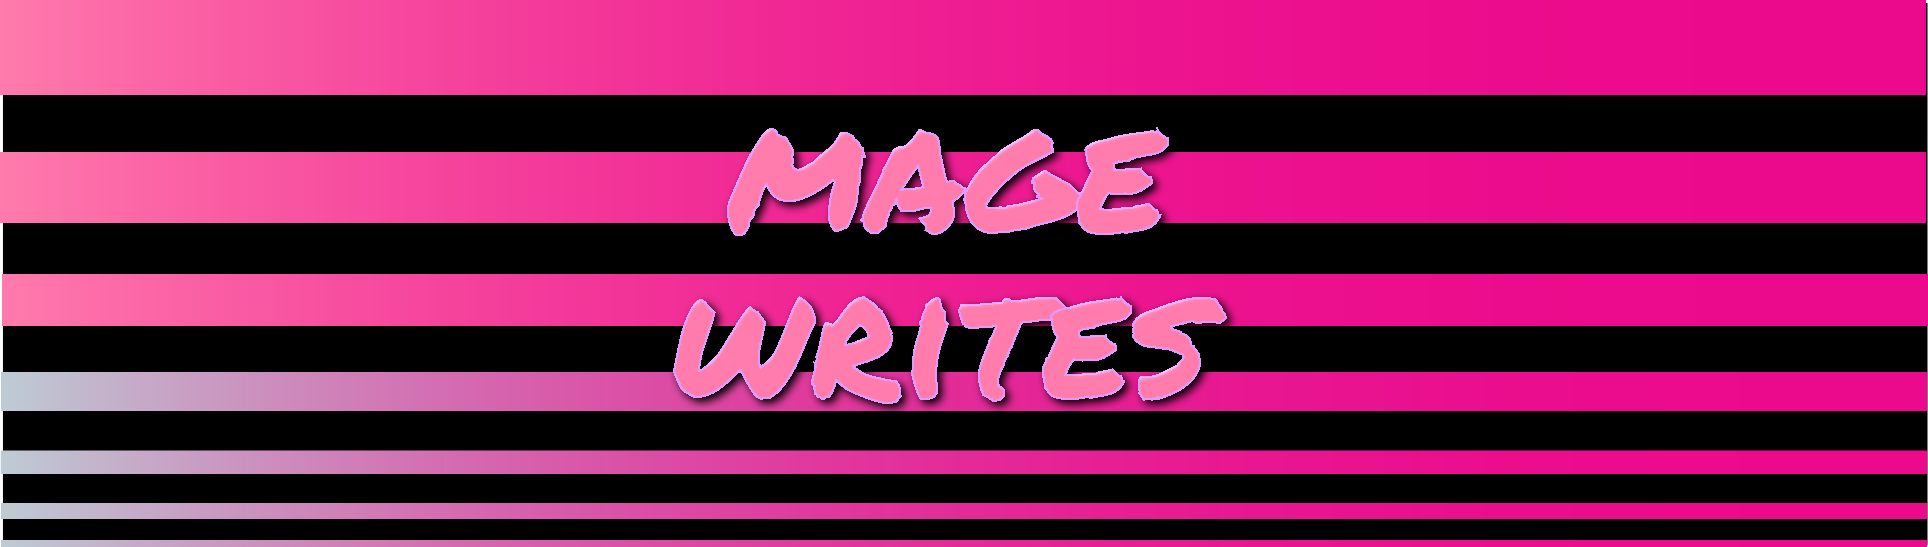 hot pink and black stripes with marker font text, Mage Writes